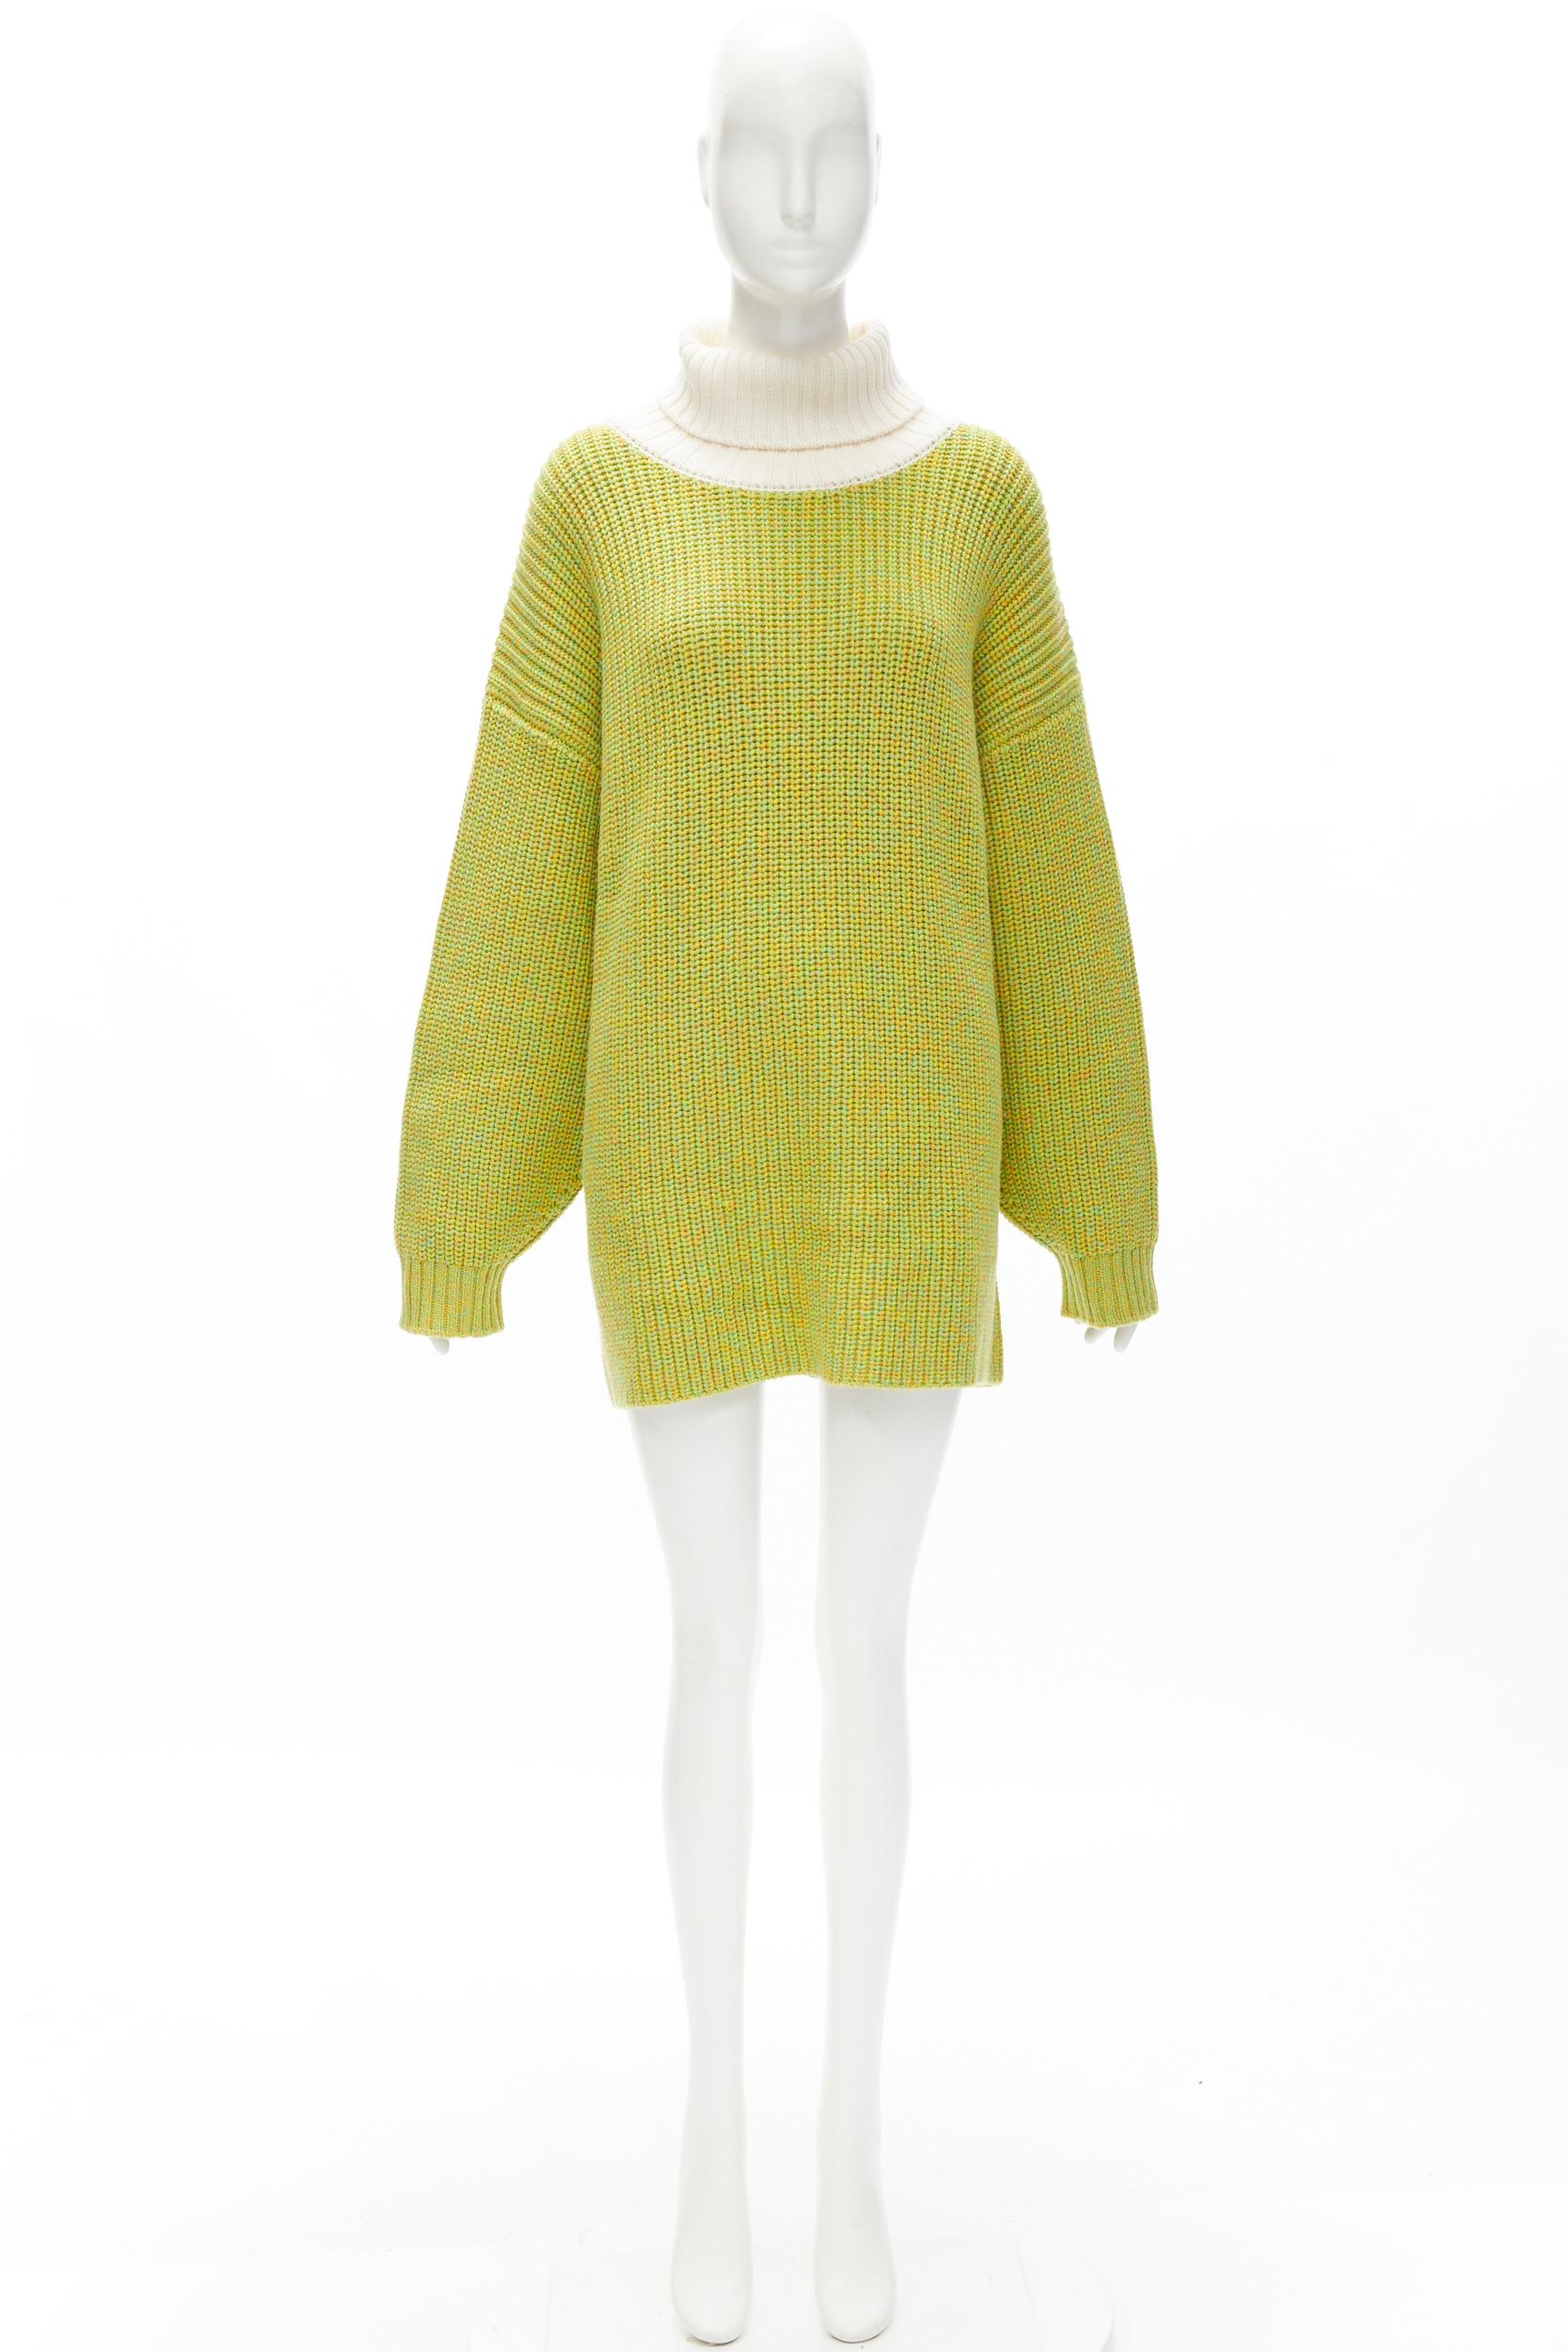 TIBI 100% merino wool lime yellow contrast rolled turtleneck sweater M/L For Sale 5